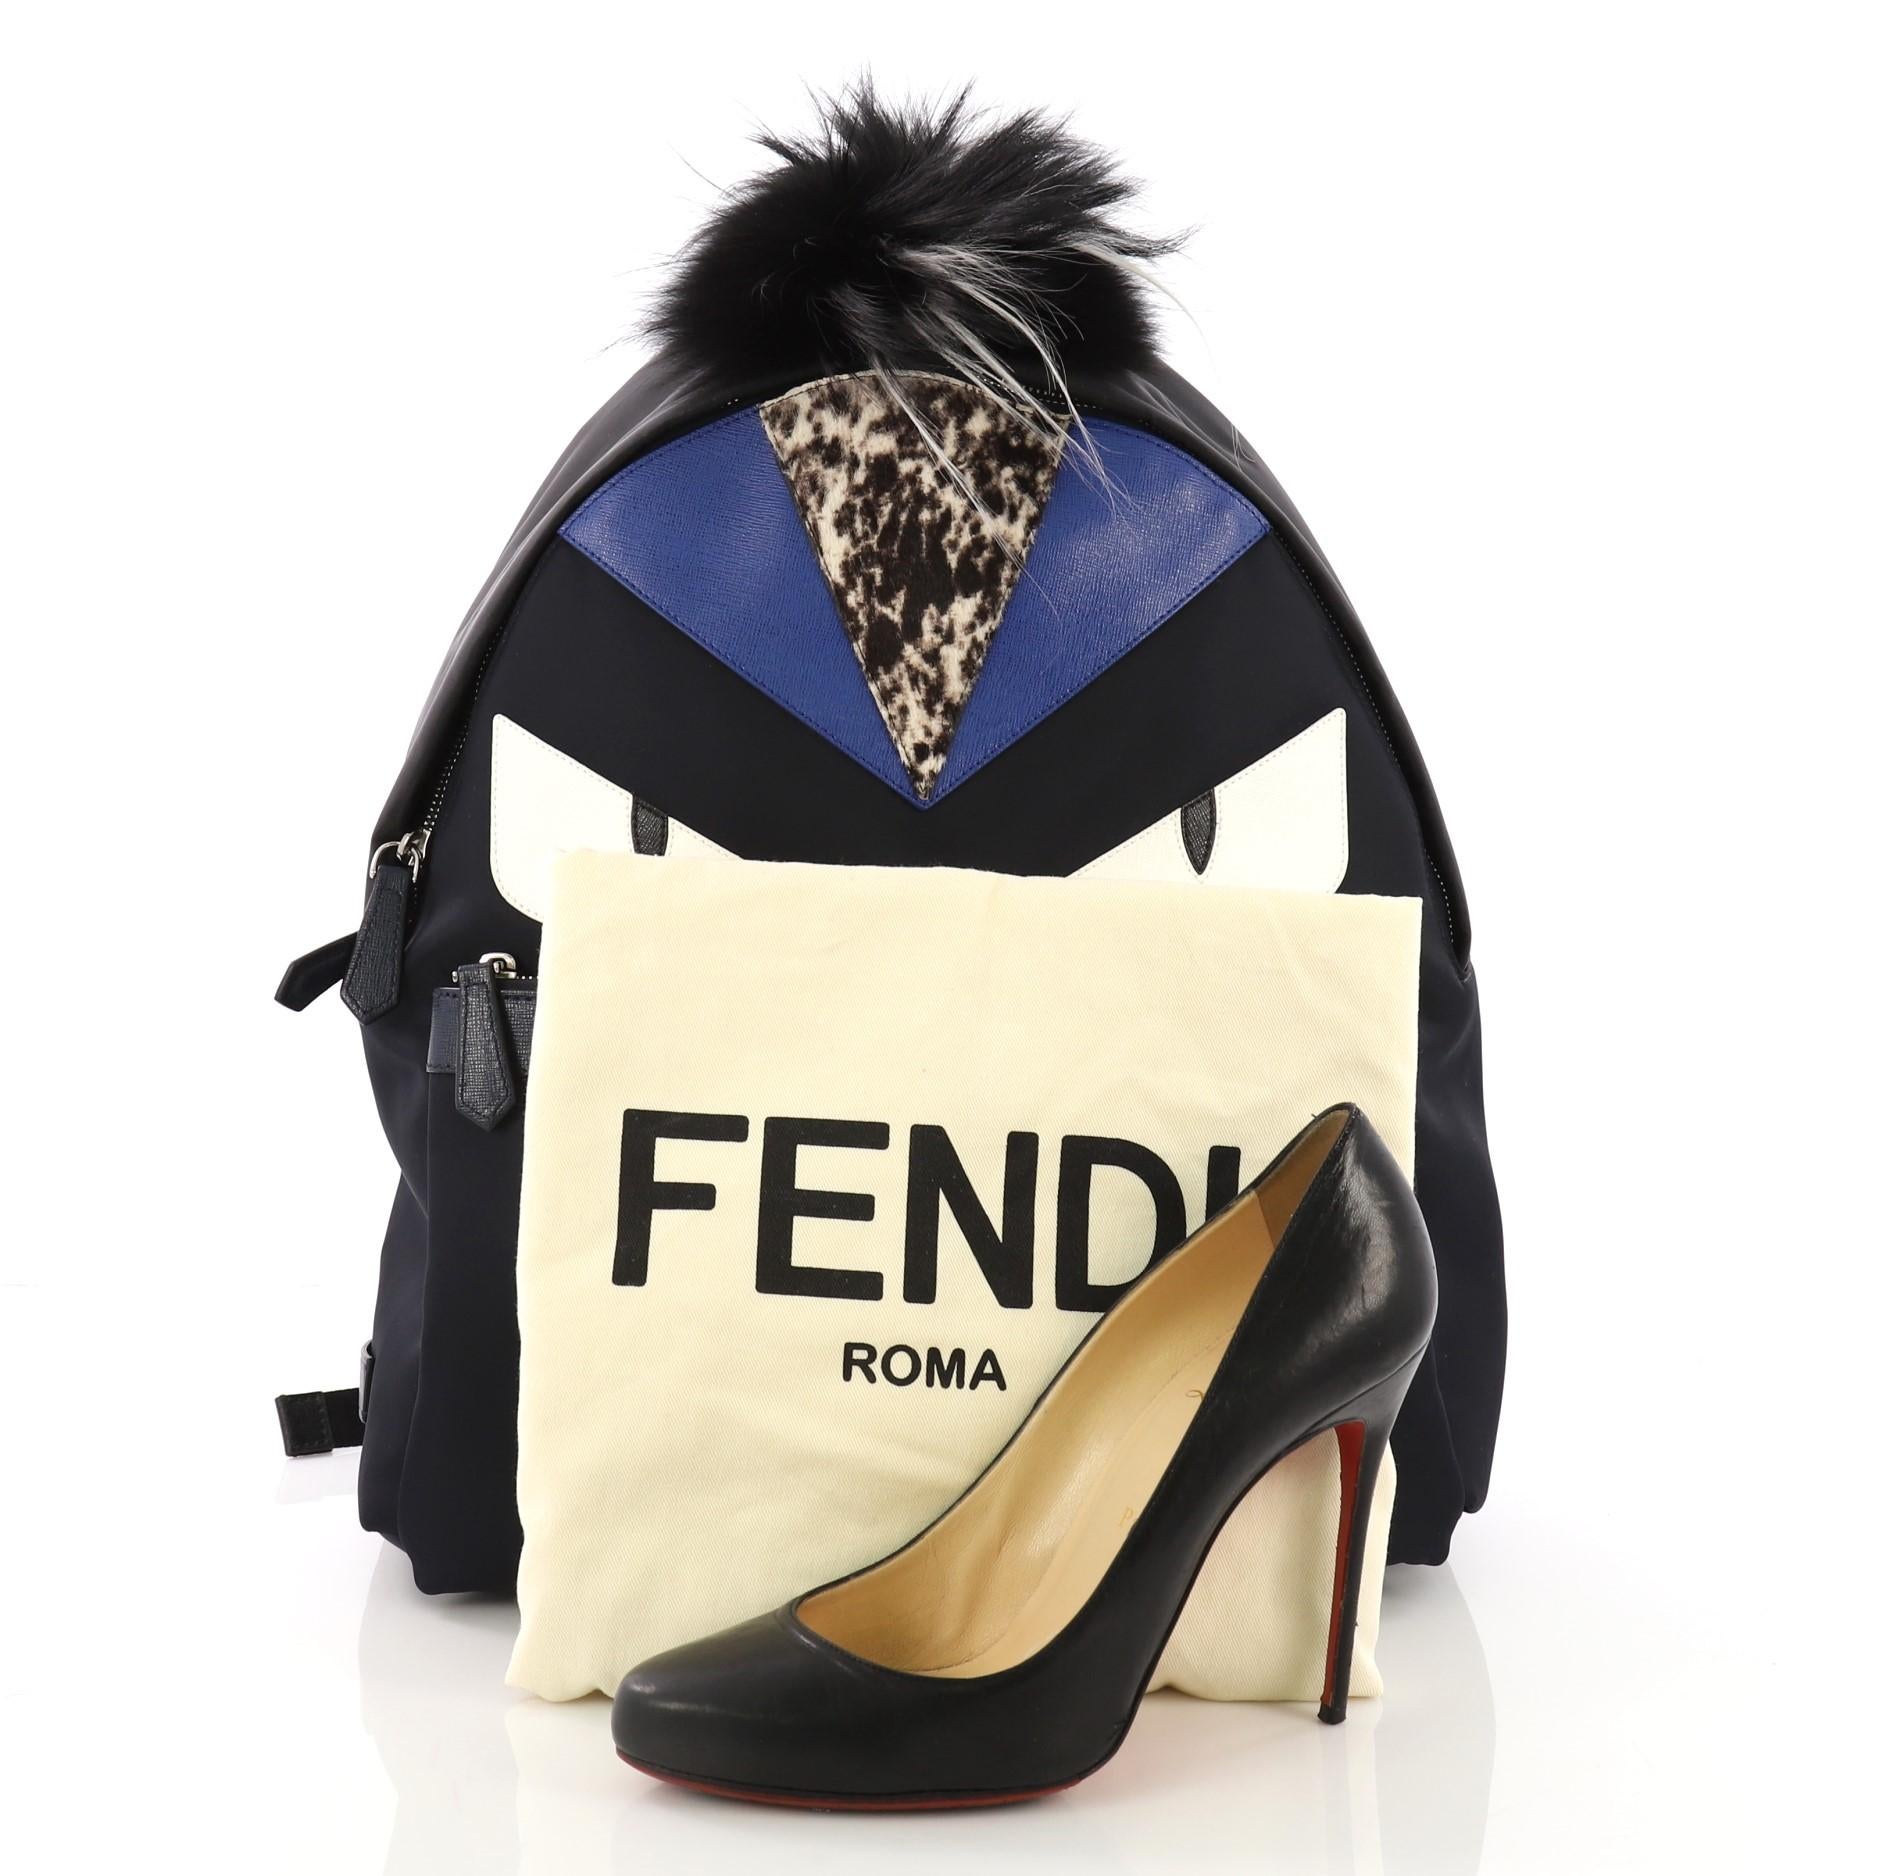 This Fendi Monster Backpack Nylon with Leather and Fur Medium, crafted from navy nylon, features Fendi's popular monster design in leather and fur accents, a flat top handle, adjustable shoulder straps, exterior front zip pocket, and silver-tone